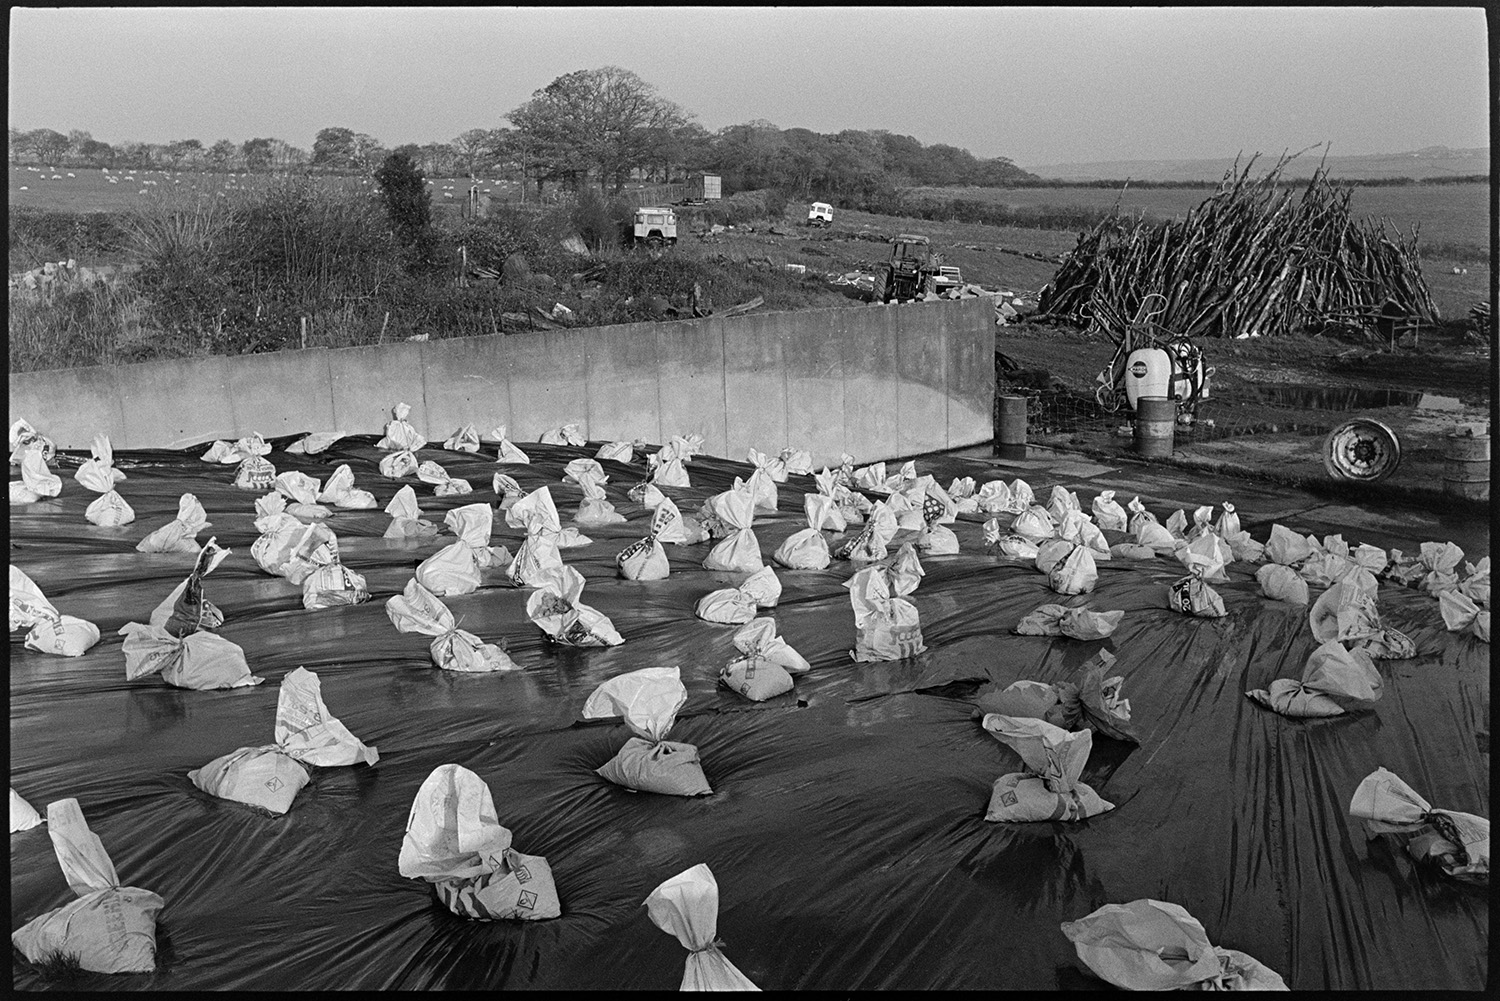 Polythene covered silage with white plastic bags as weights. 
[A silage clamp covered with polythene and weighted down with plastic sacks in the farmyard at Parsonage Farm, Chulmleigh. A concrete wall runs along the edge of the clamp and a woodpile can be seen in the background.]